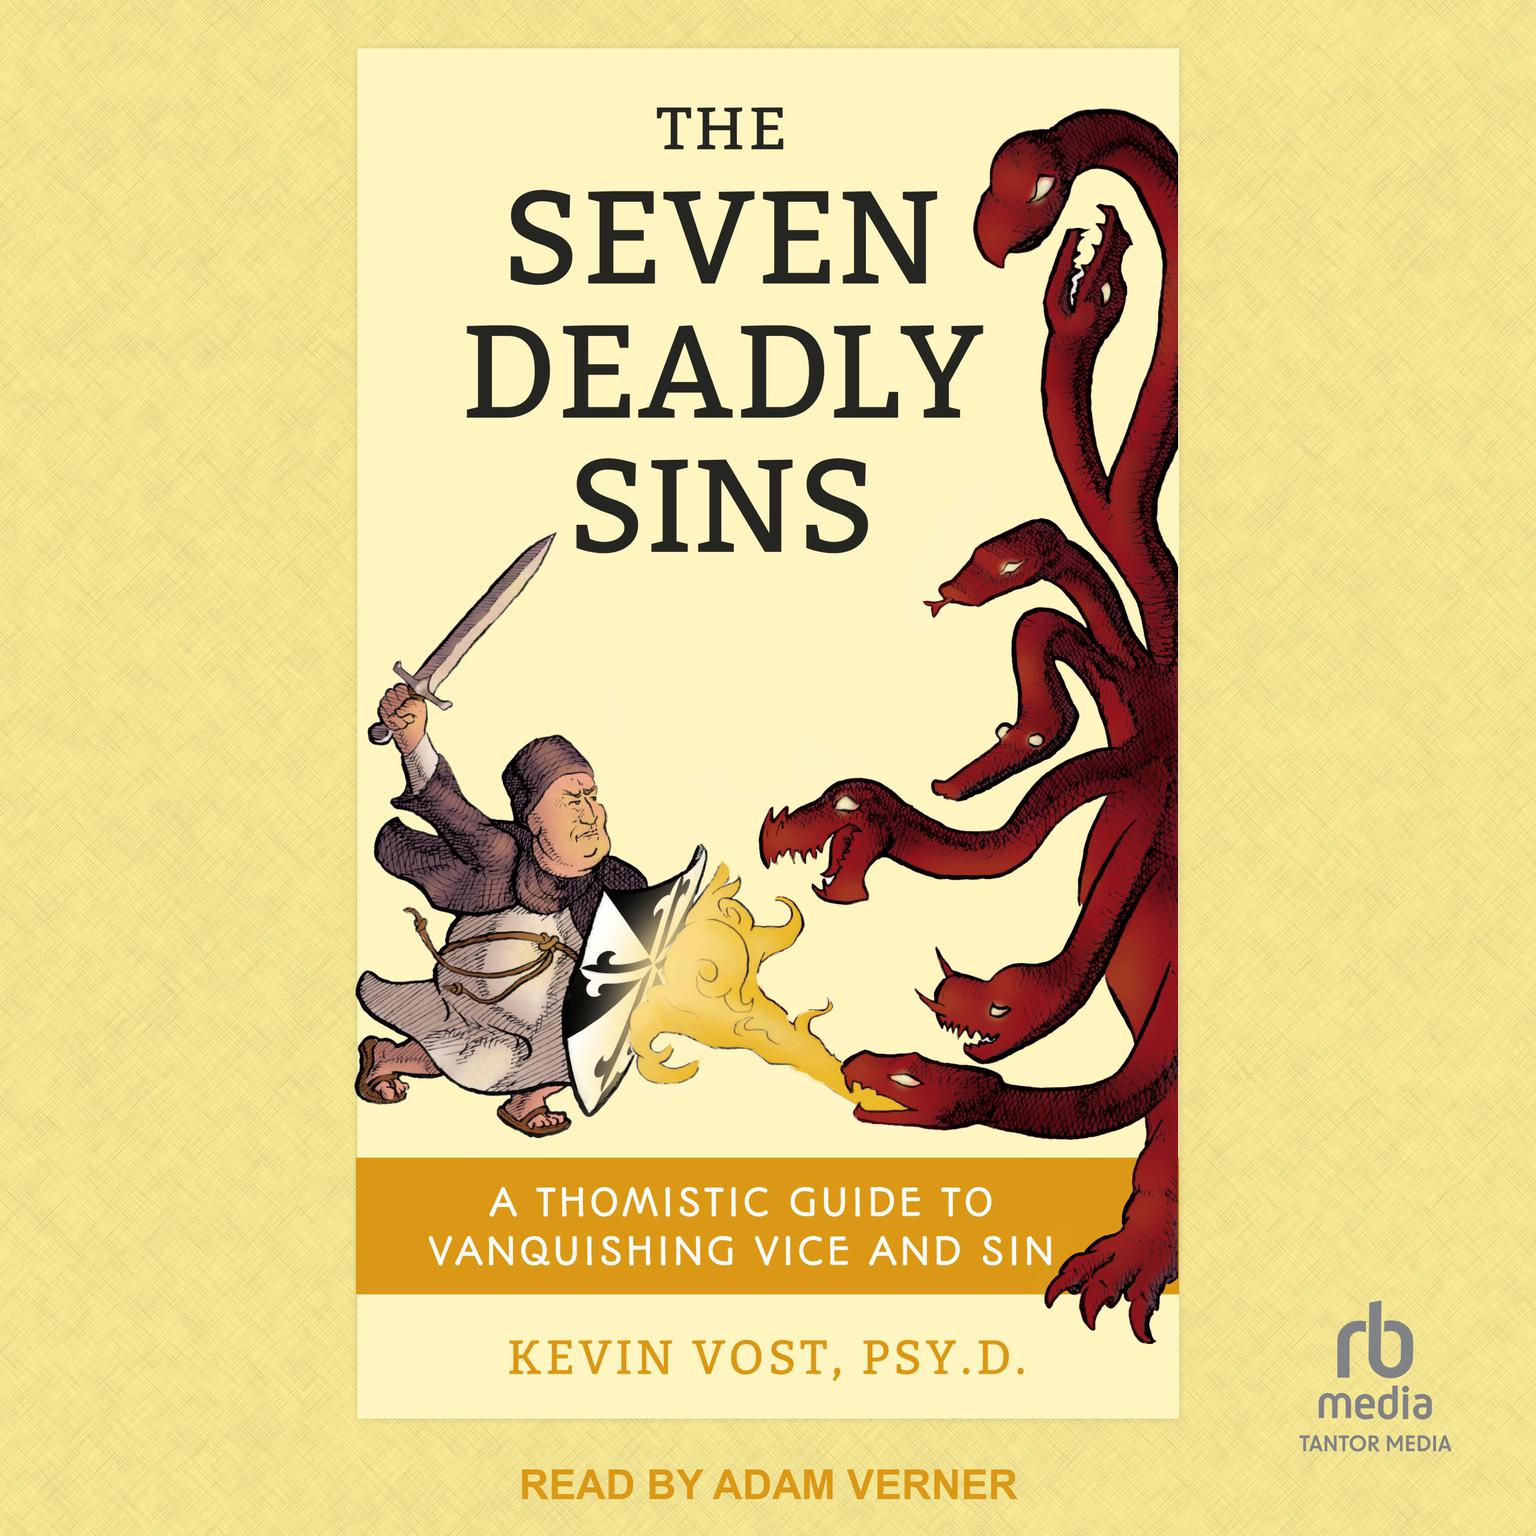 The Seven Deadly Sins: A Thomistic Guide to Vanquishing Vice and Sin Audiobook, by Kevin Vost